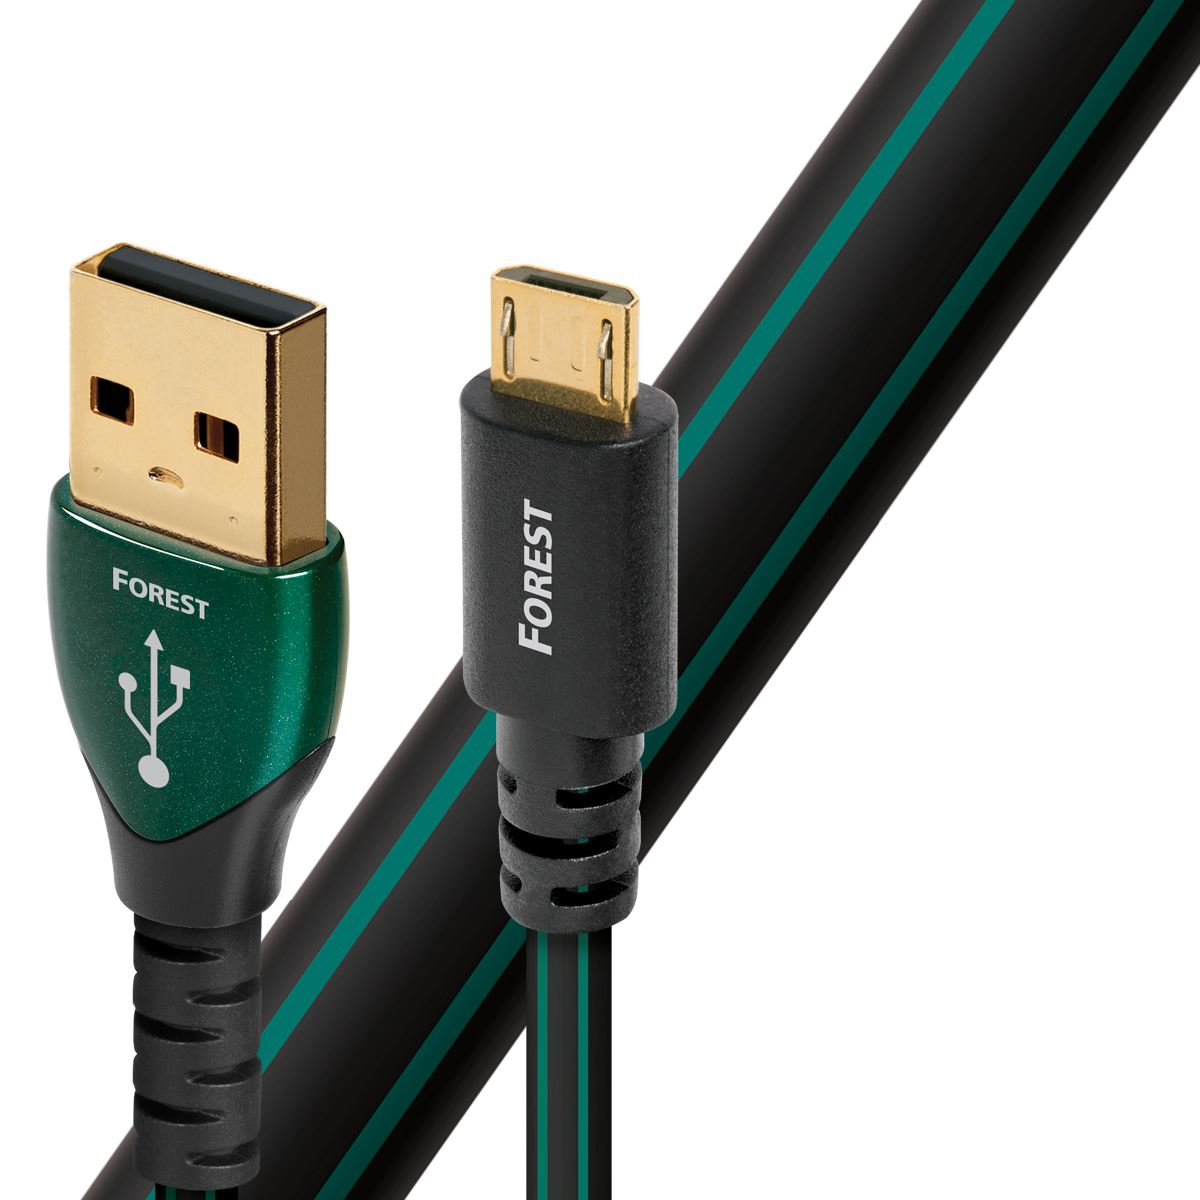 AUDIOQUEST_Forest_1.5M_USB3A-USB4_micro._O.5%_silver._Hard-cell_foam._Metal-layer_noise_dissipation_Jacket_-_black_PVC_with_green_stripes. 1912